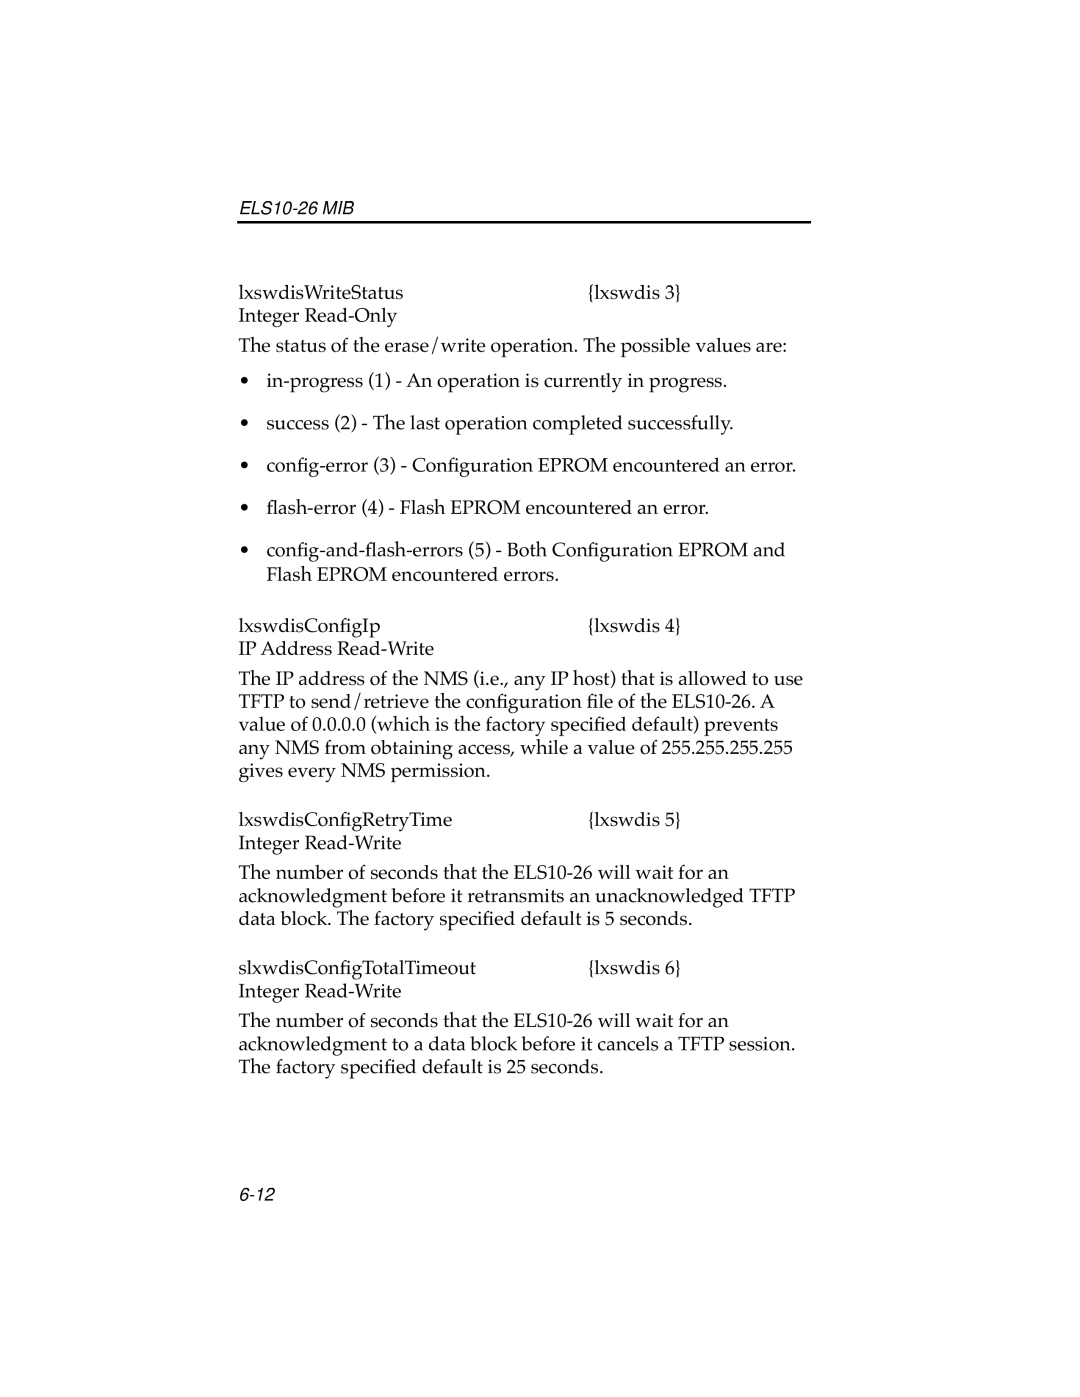 Cabletron Systems ELS10-26 manual lxswdisWriteStatus 